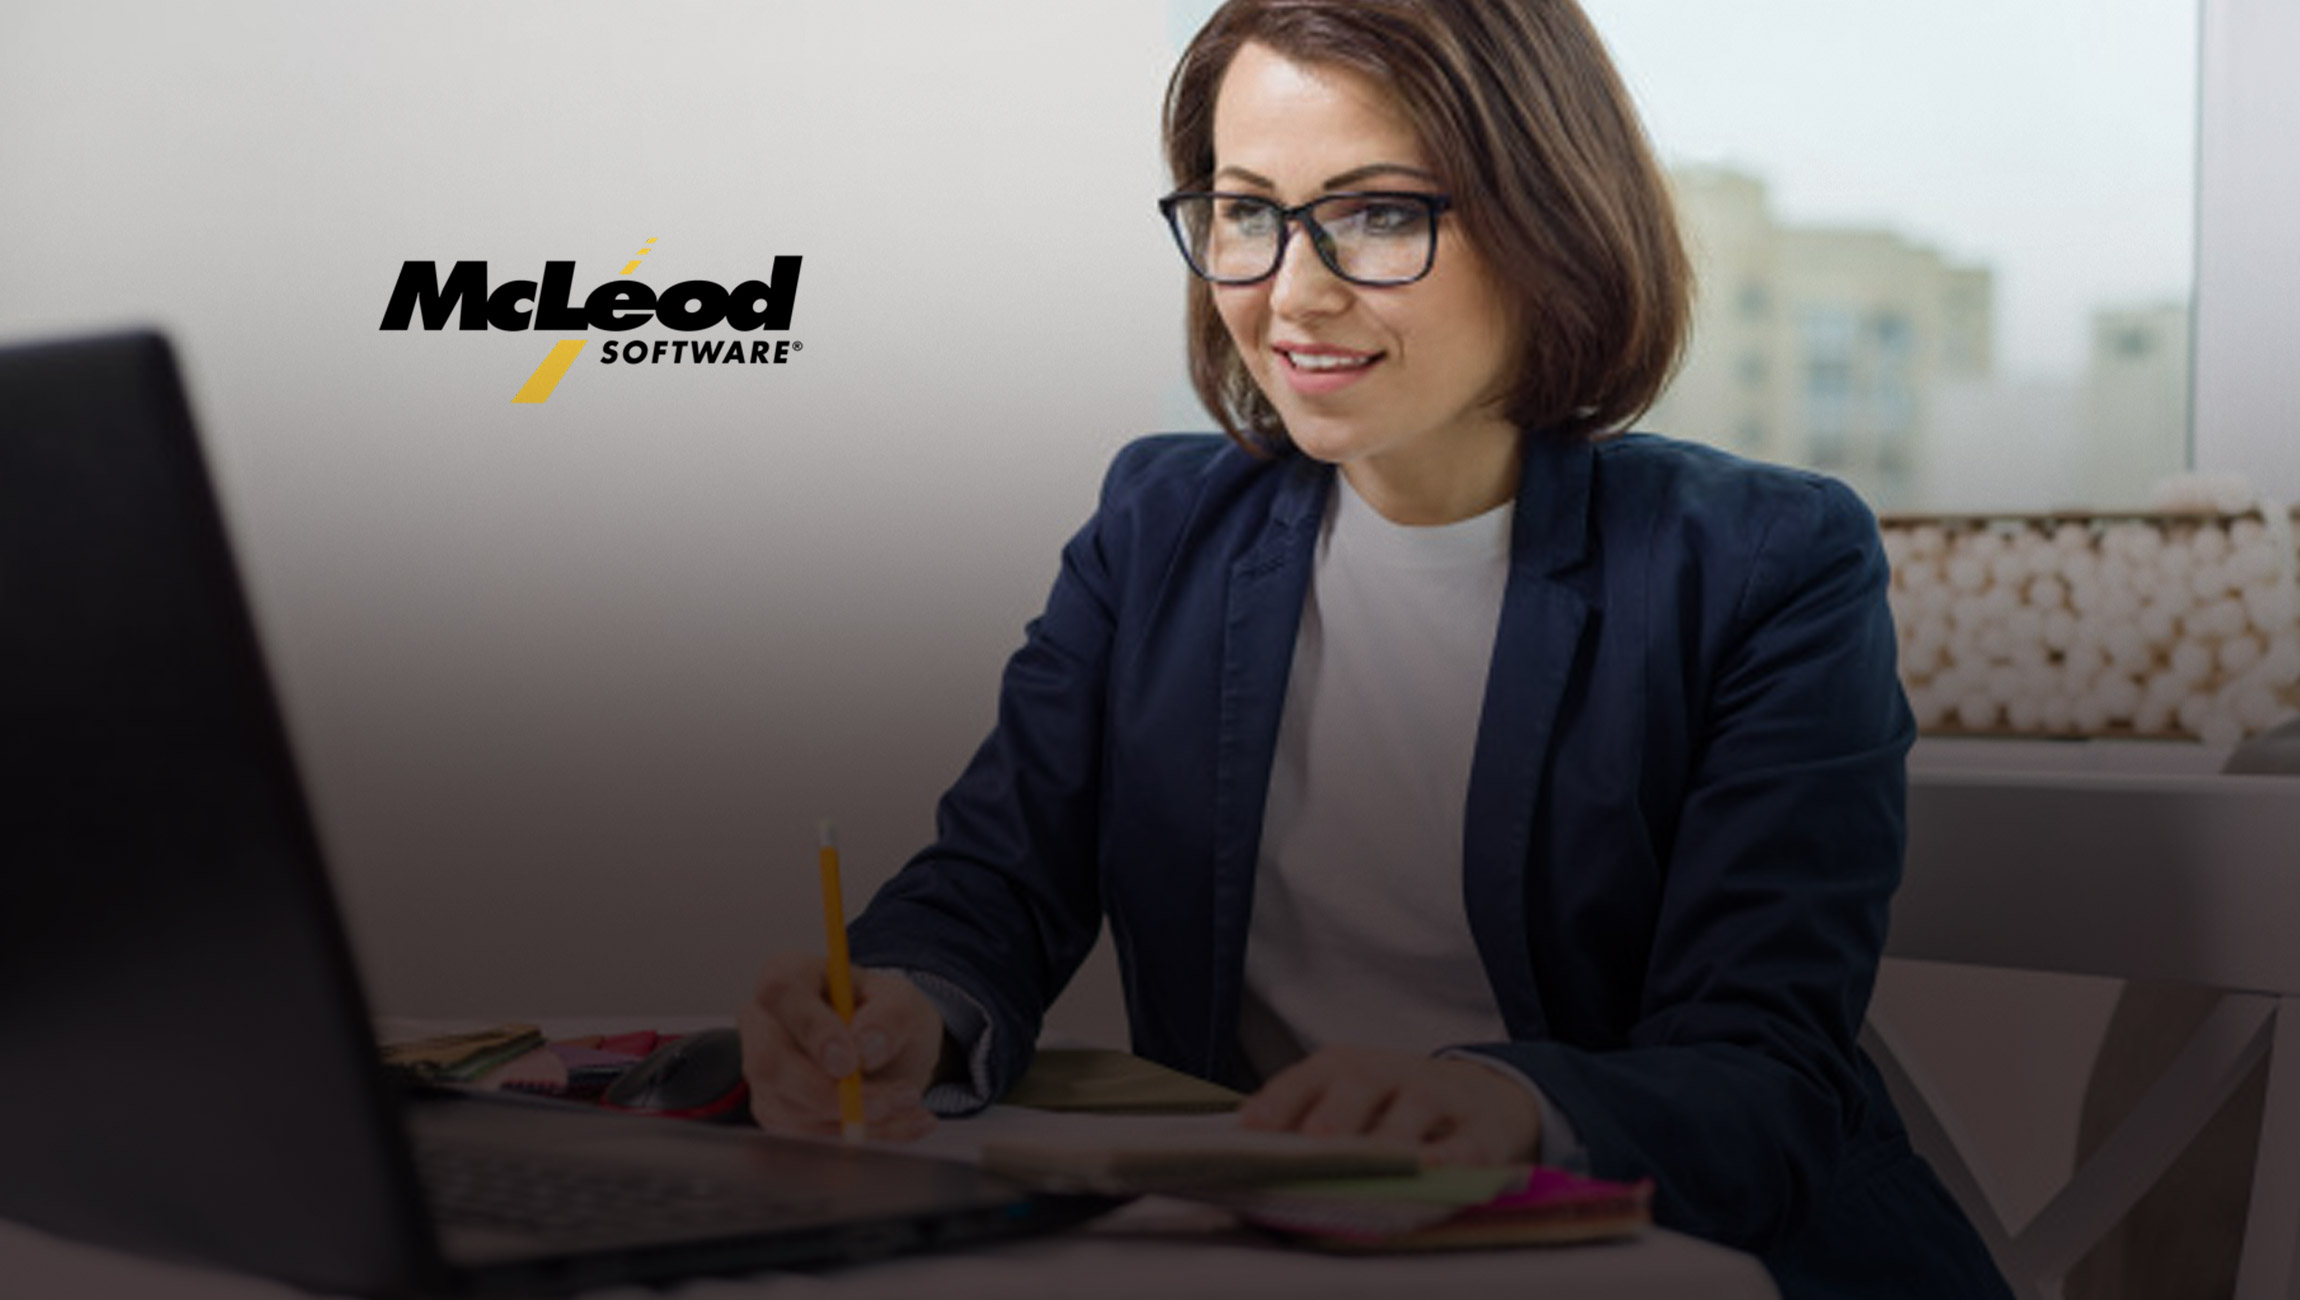 McLeod Software makes Customer Service Teams More Effective, Gives Brokers Digital Advantage, and Puts Cloud-Based Business Intelligence to Work